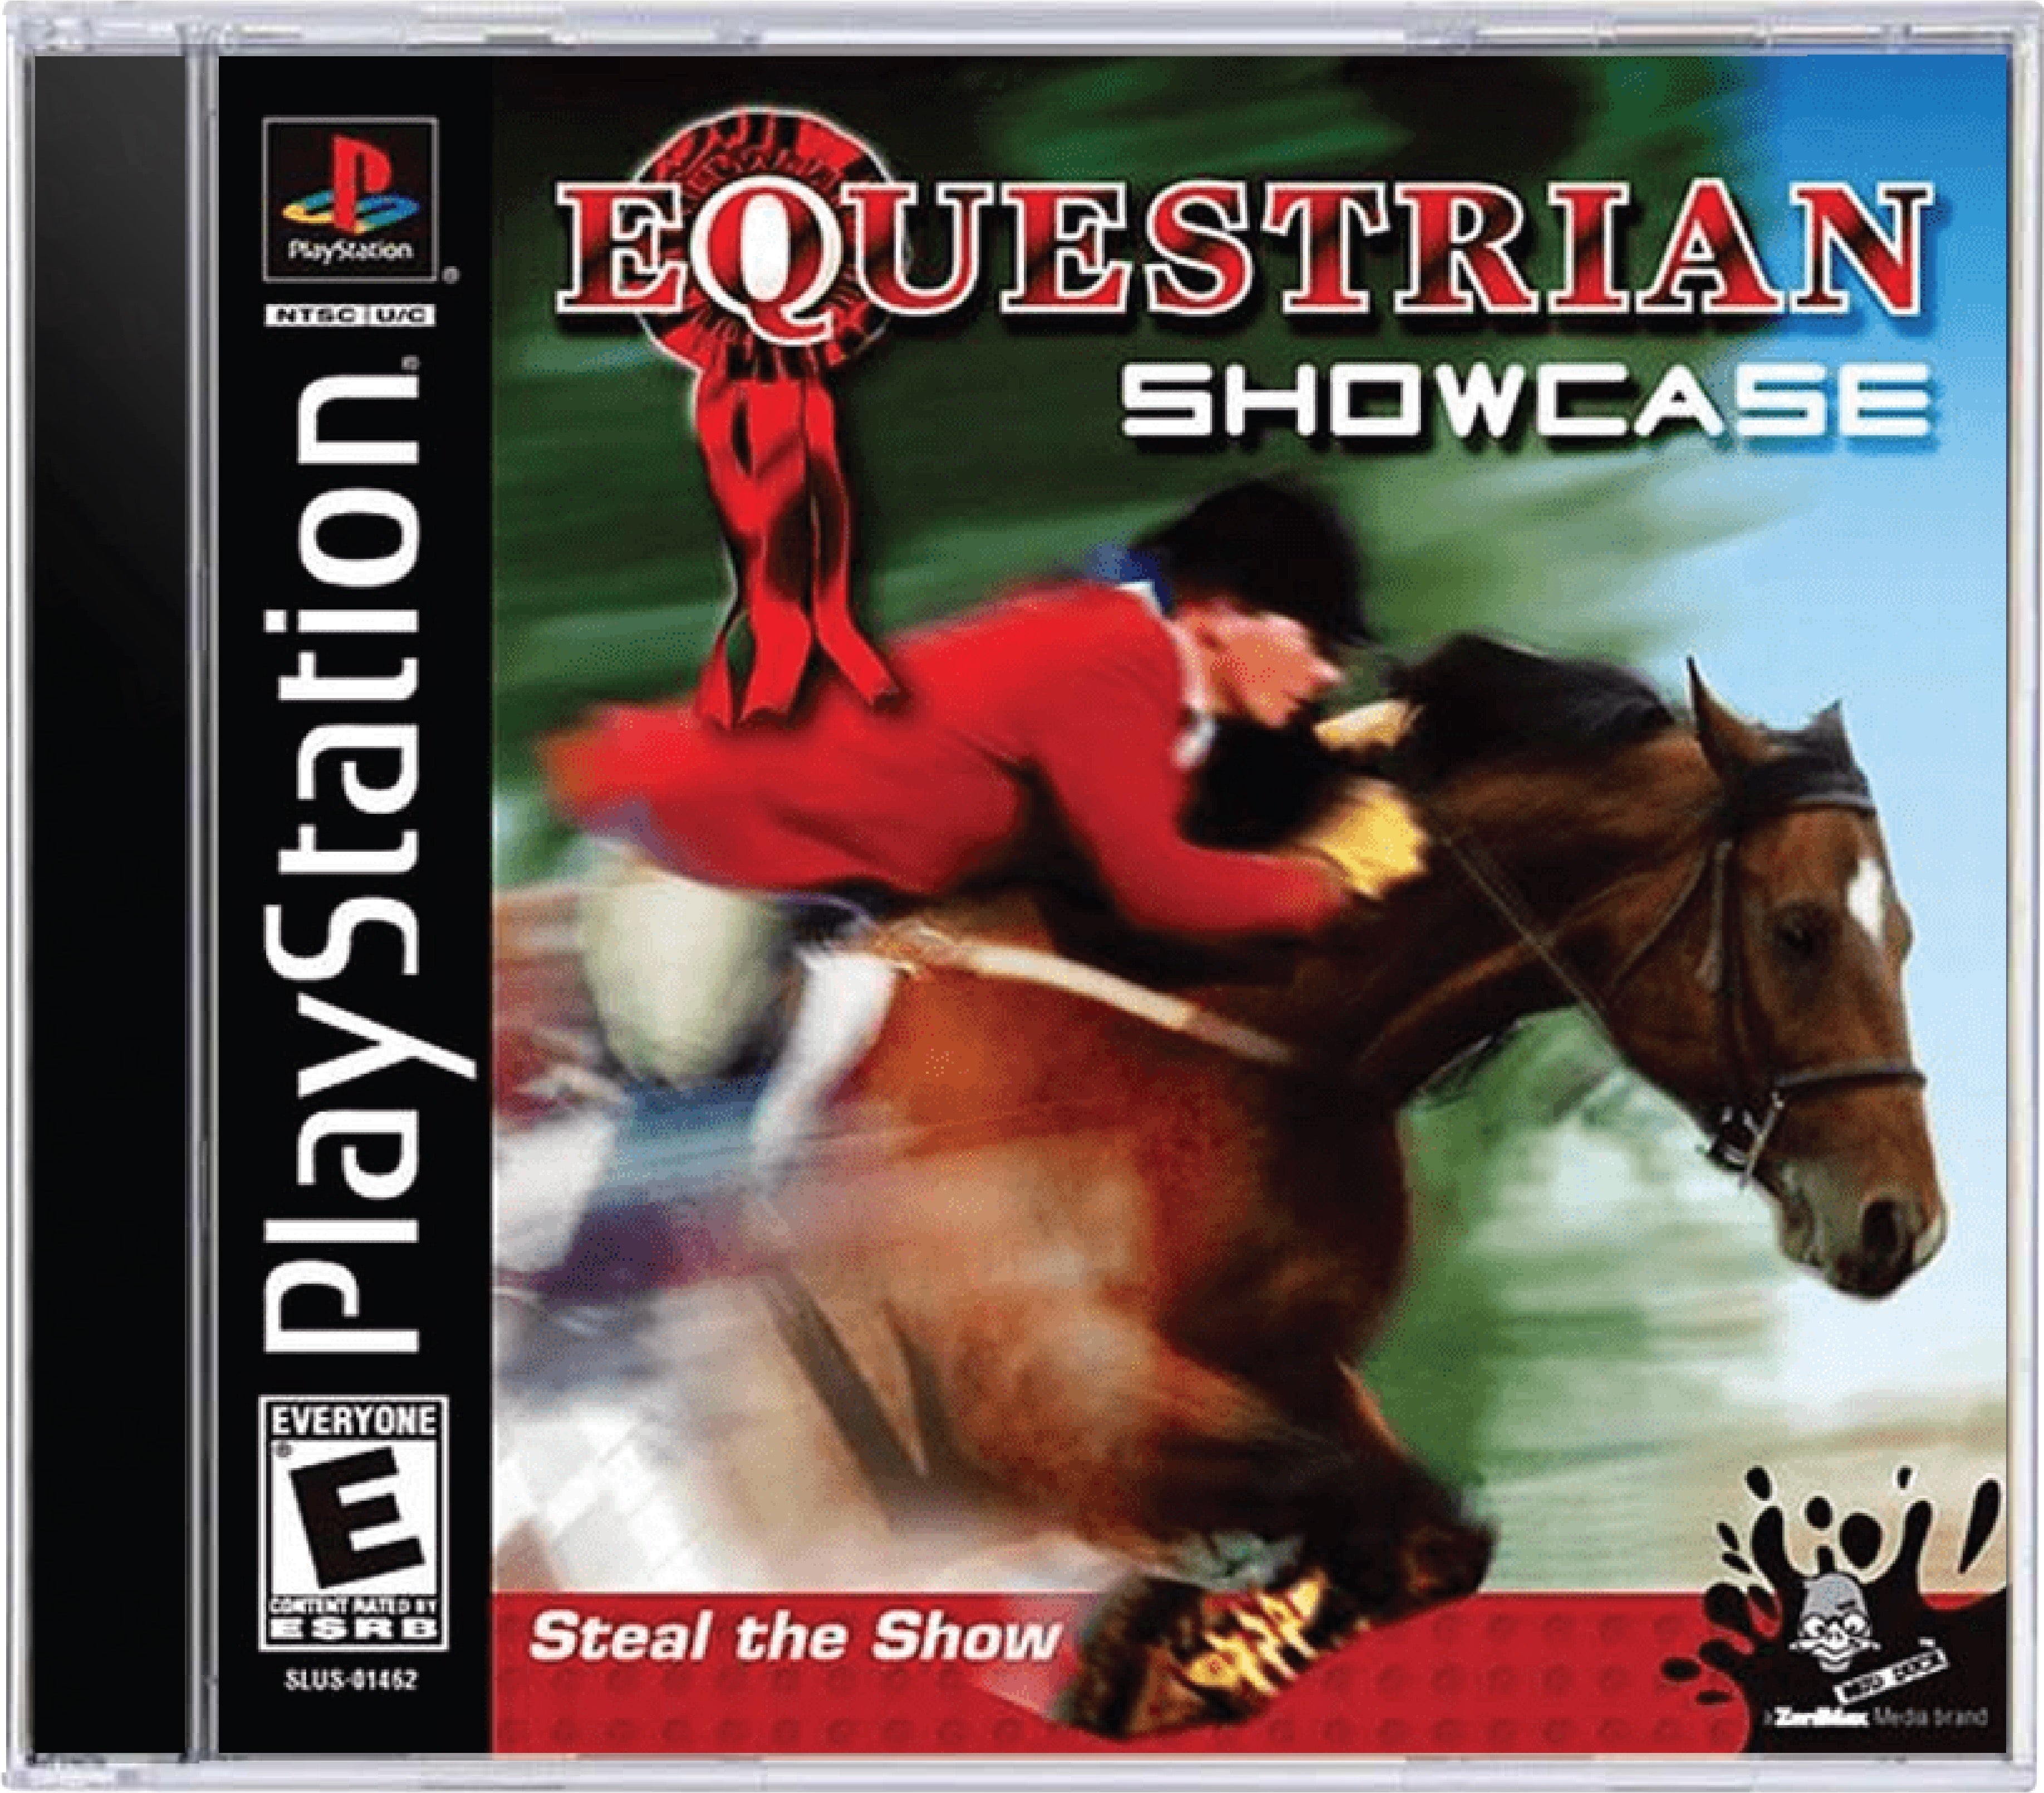 Equestrian Showcase Cover Art and Product Photo